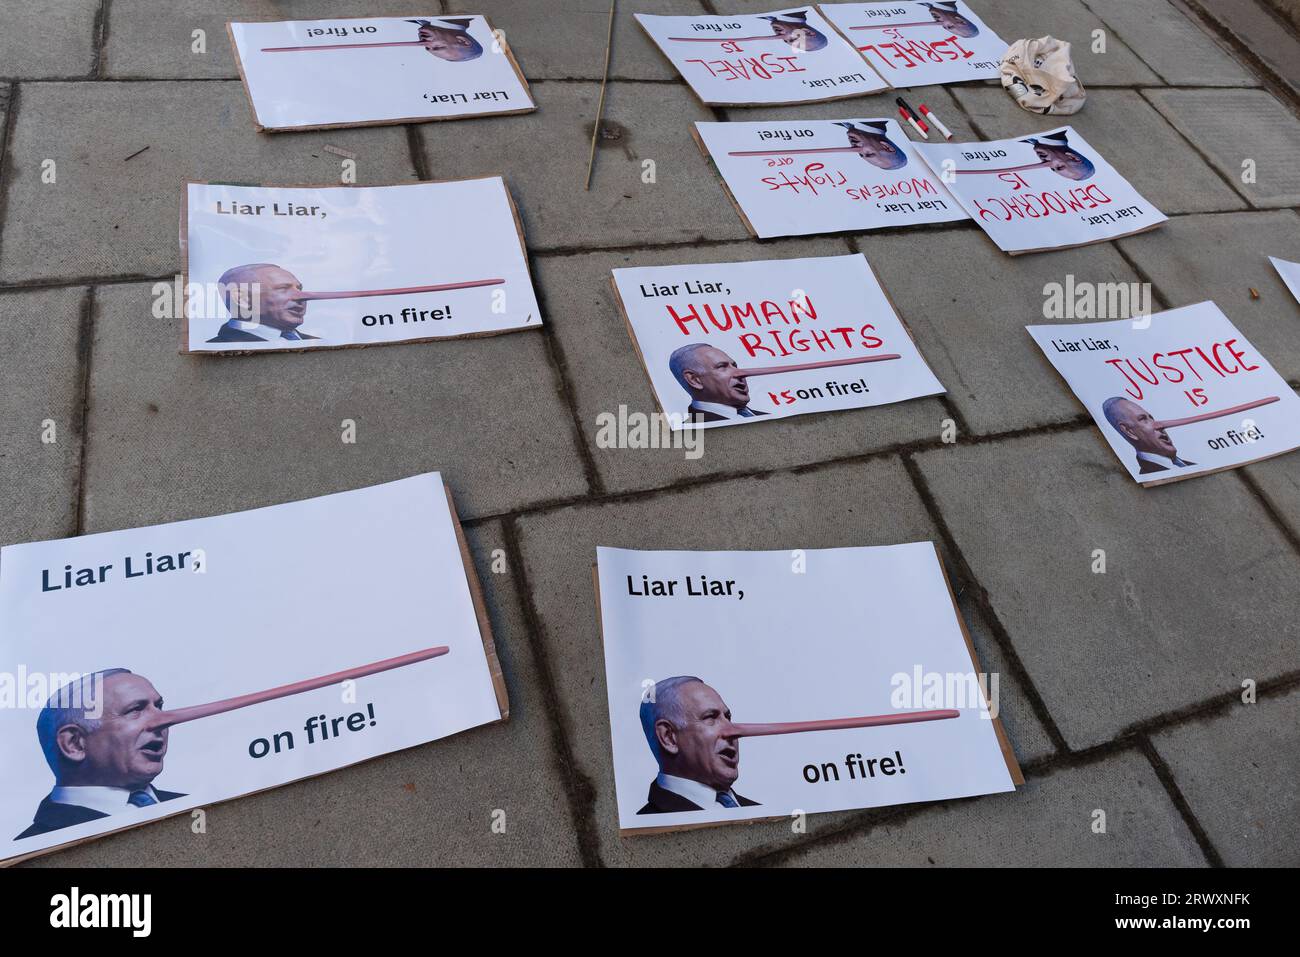 London, UK. 21 September, 2023. Anglo-Israeli democrats prepare placards for a protest outside the Foreign, Commonwealth & Development Office on the eve of a speech by right-wing Israeli Prime Minister Benjamin Netanyahu at the UN General Assembly in New York, U.S. Credit: Ron Fassbender/Alamy Live News Stock Photo